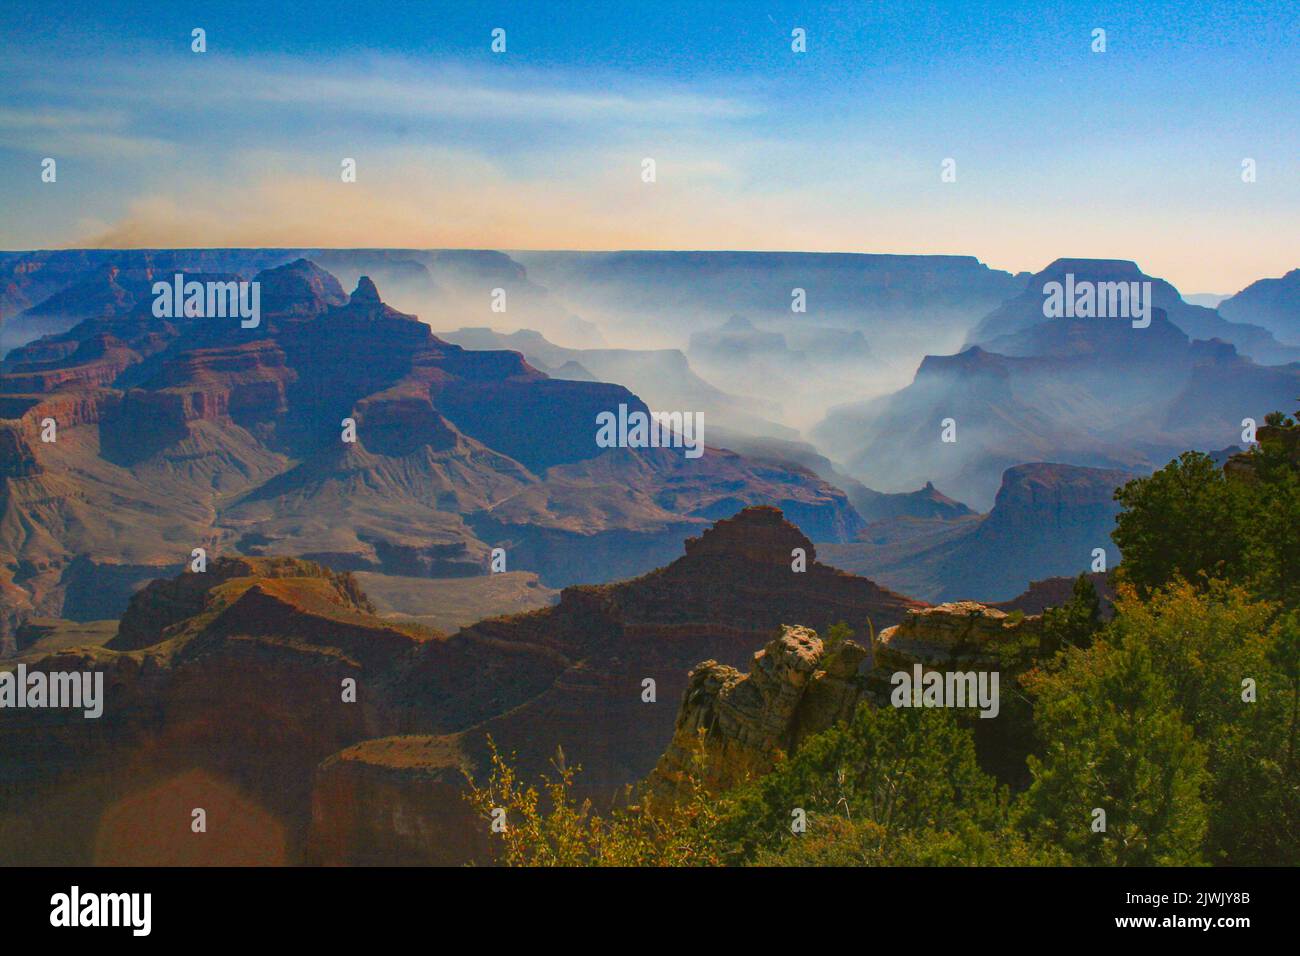 Above the clouds – Stunning early morning shot of the Grand Canyon, Arizona from the South Rim Stock Photo